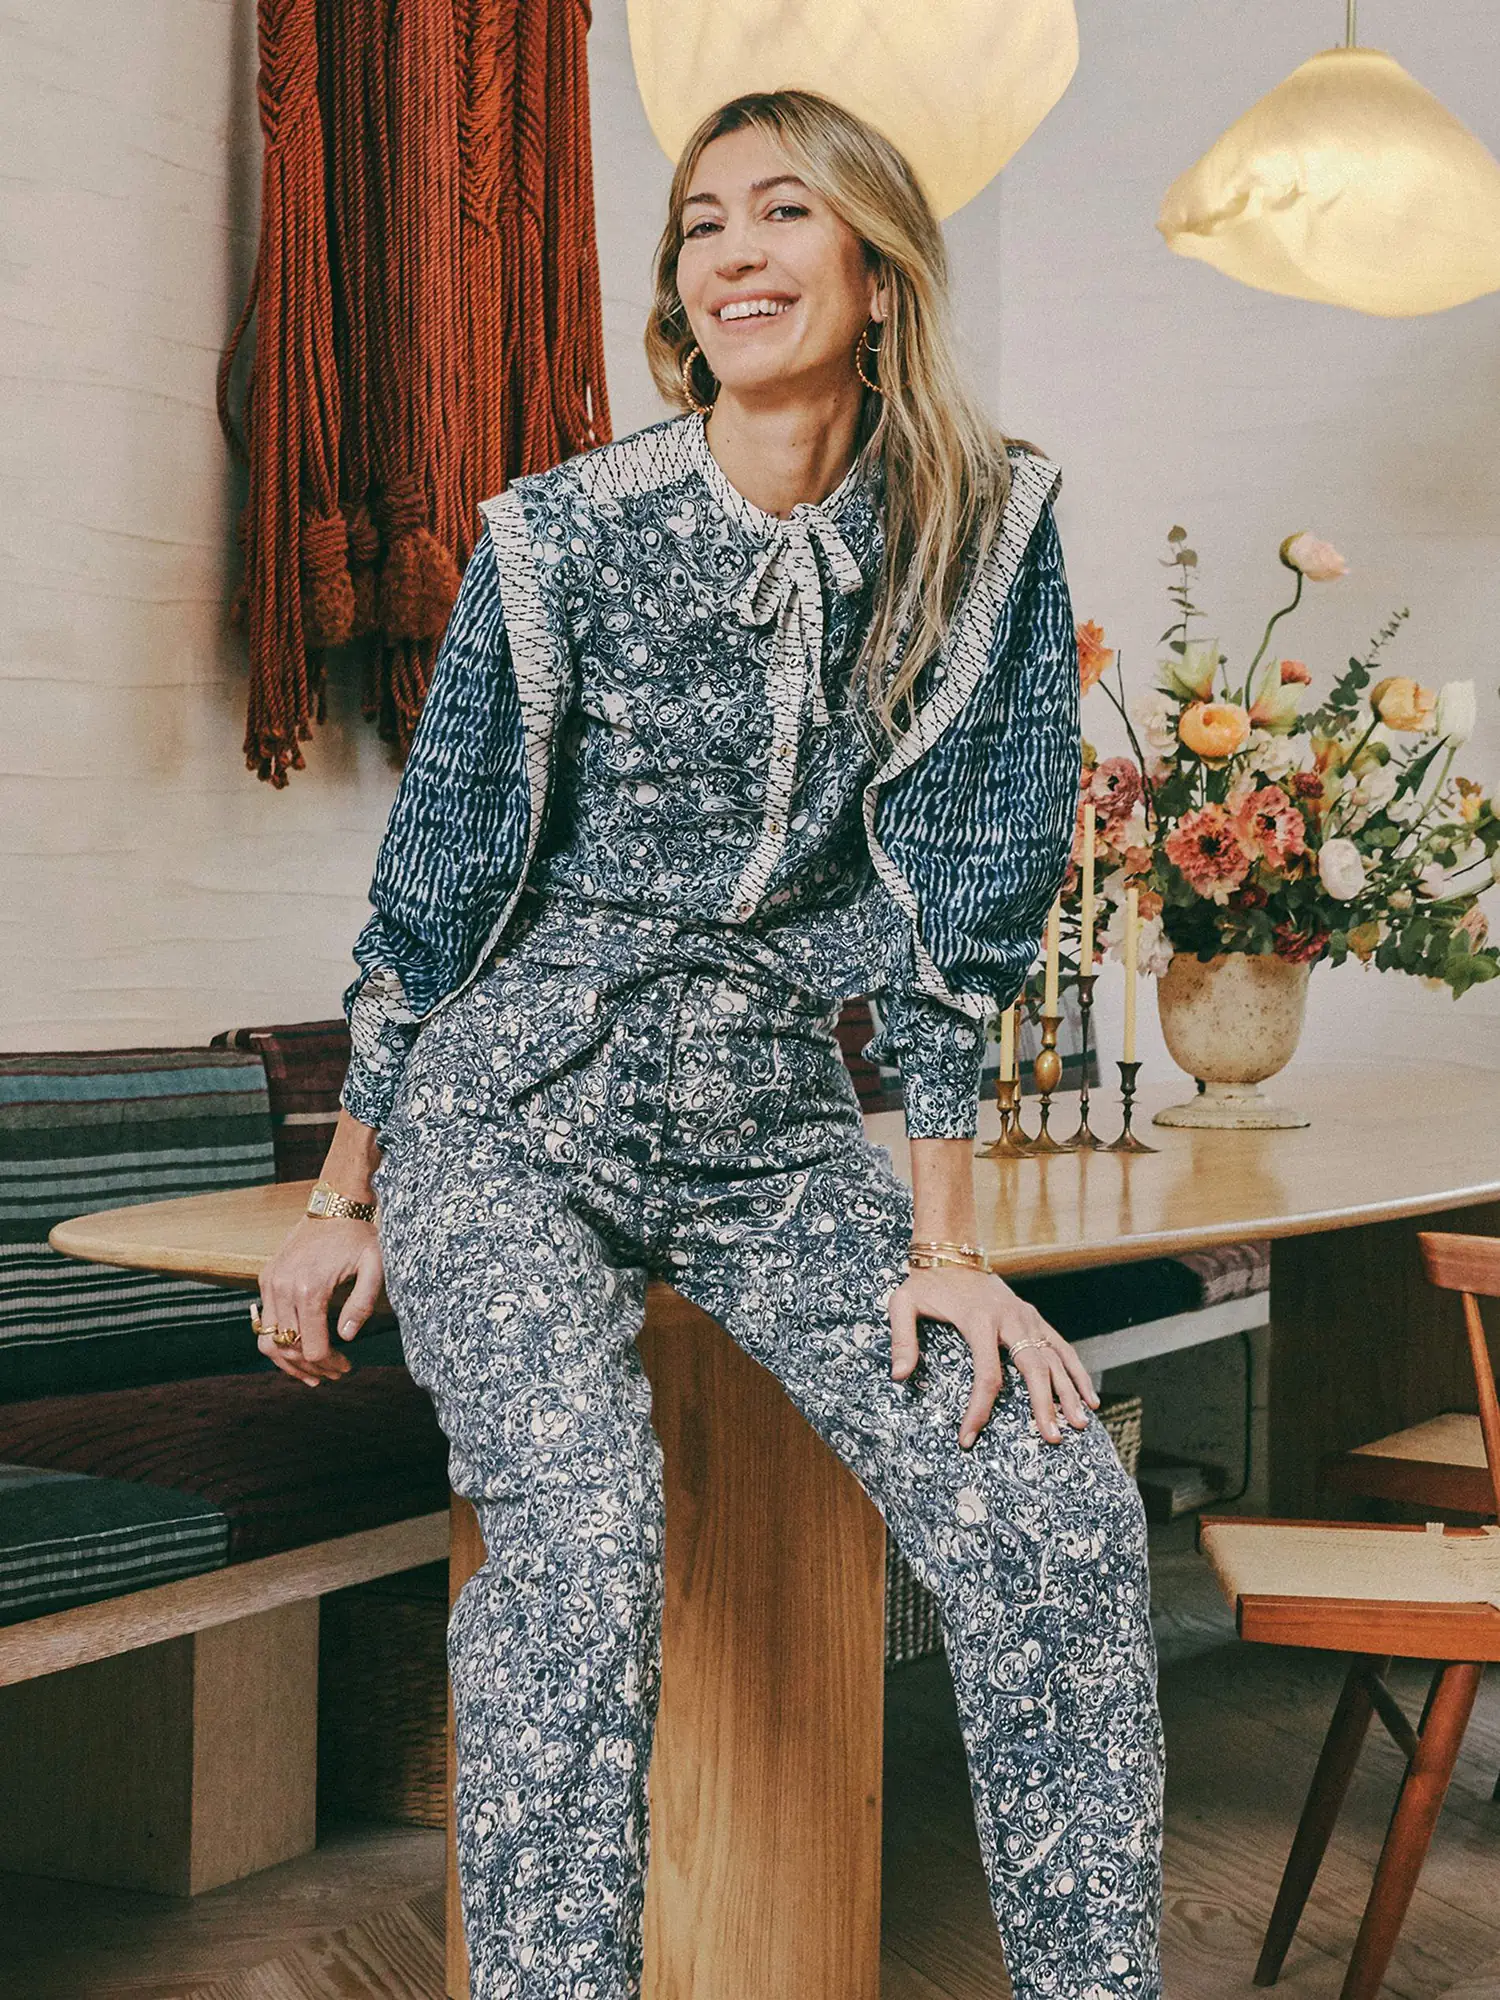 Ulla Johnson footwear set to flourish with new global licensing agreement